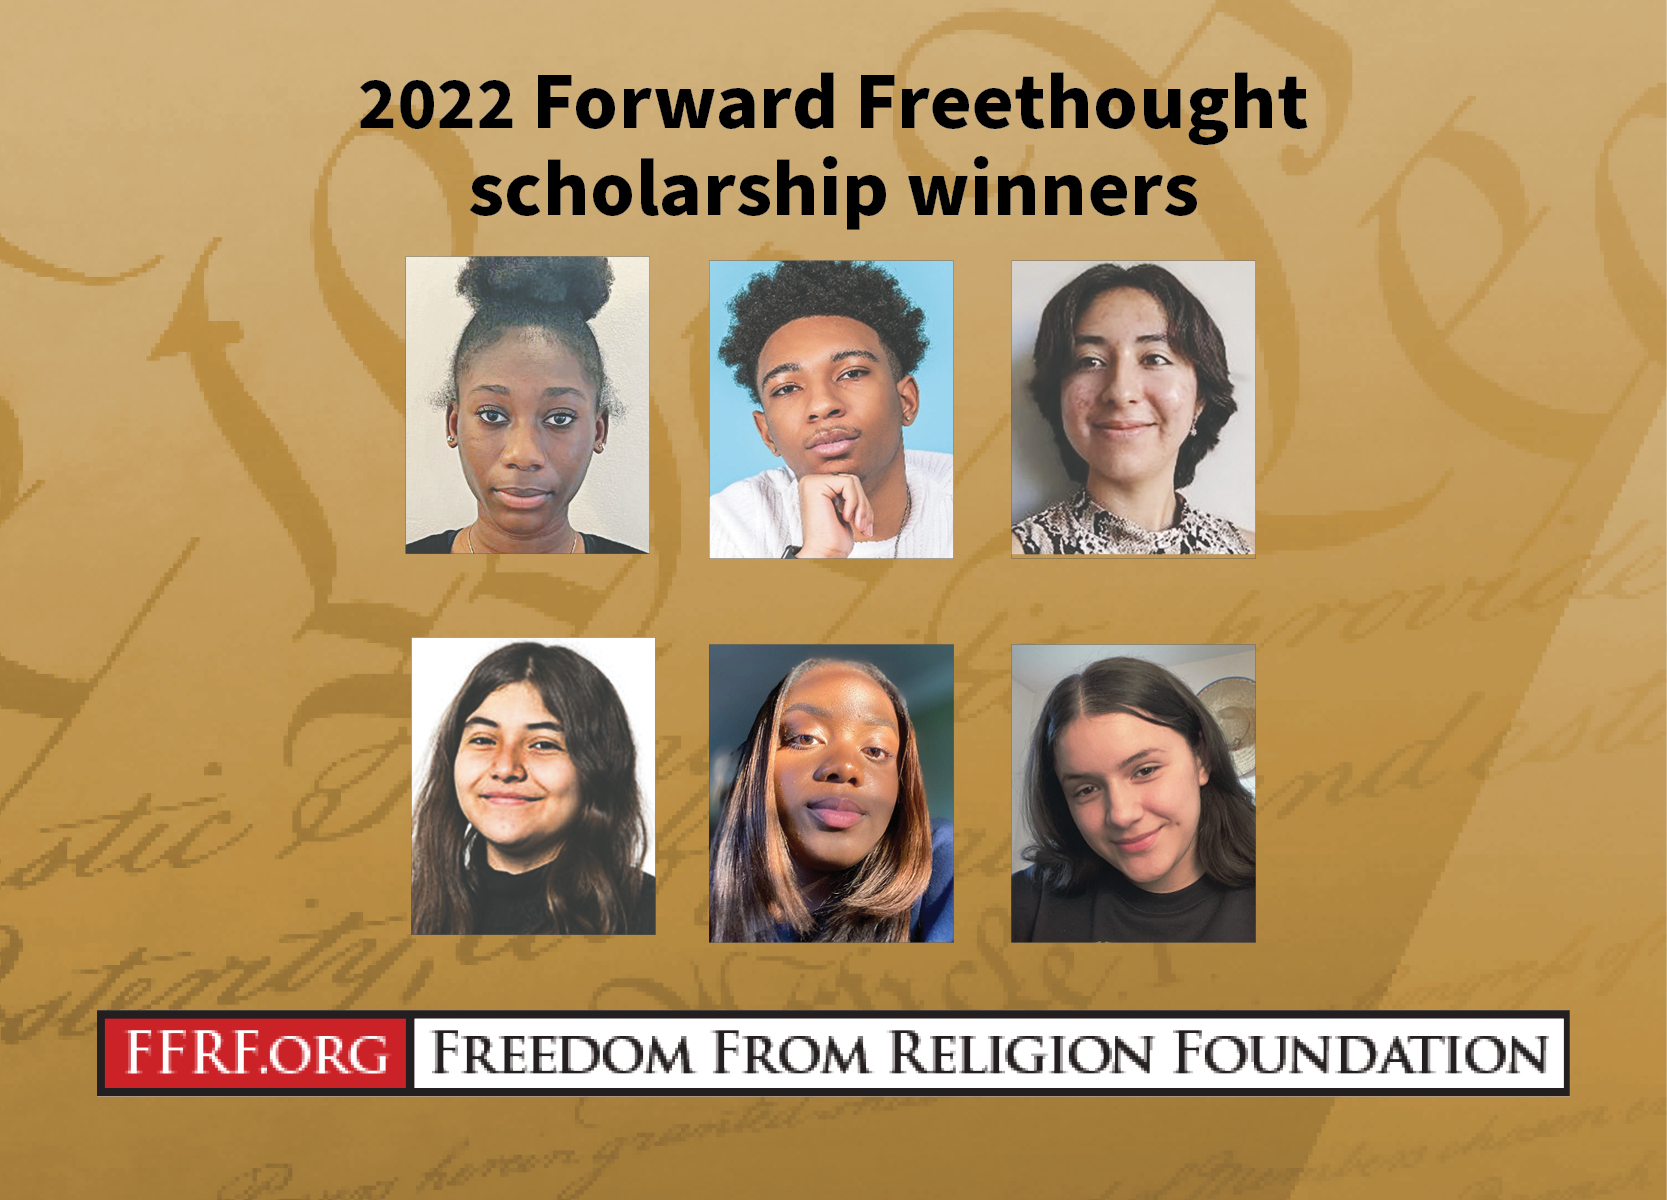 2022 Forward Freethought scholarship winners